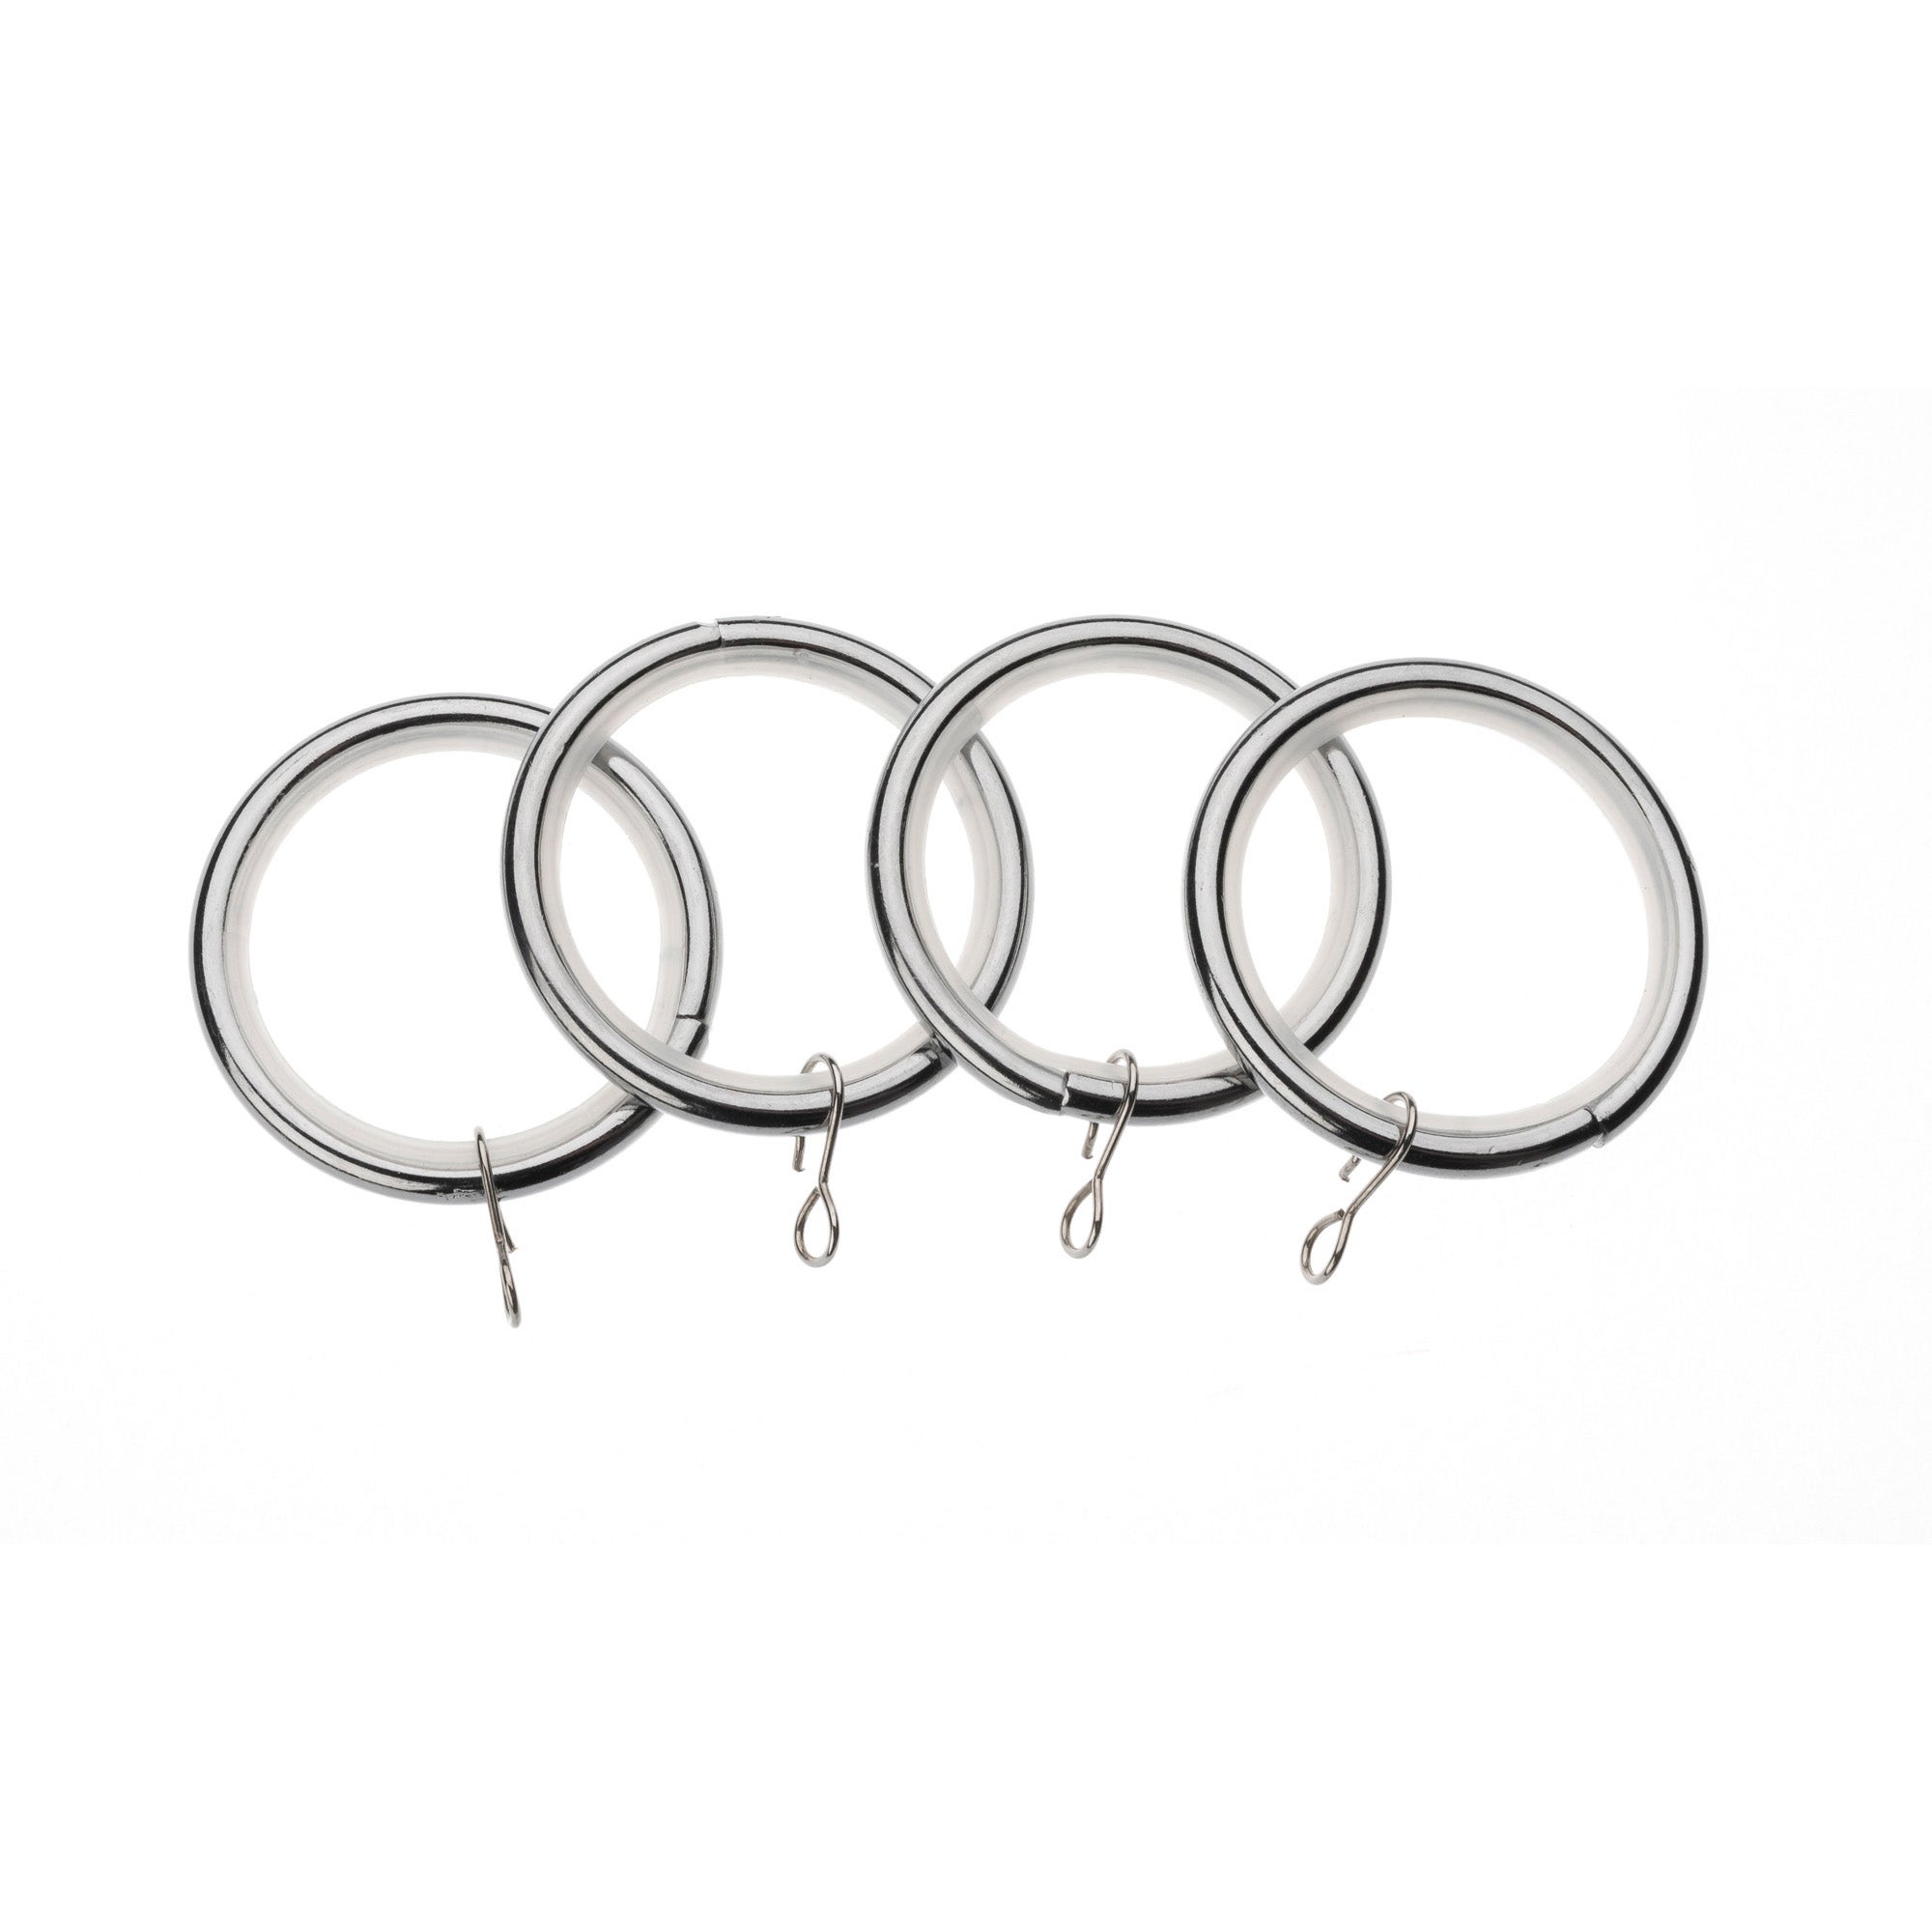 Universal Pack Of 4 19mm Curtain Rings Chrome